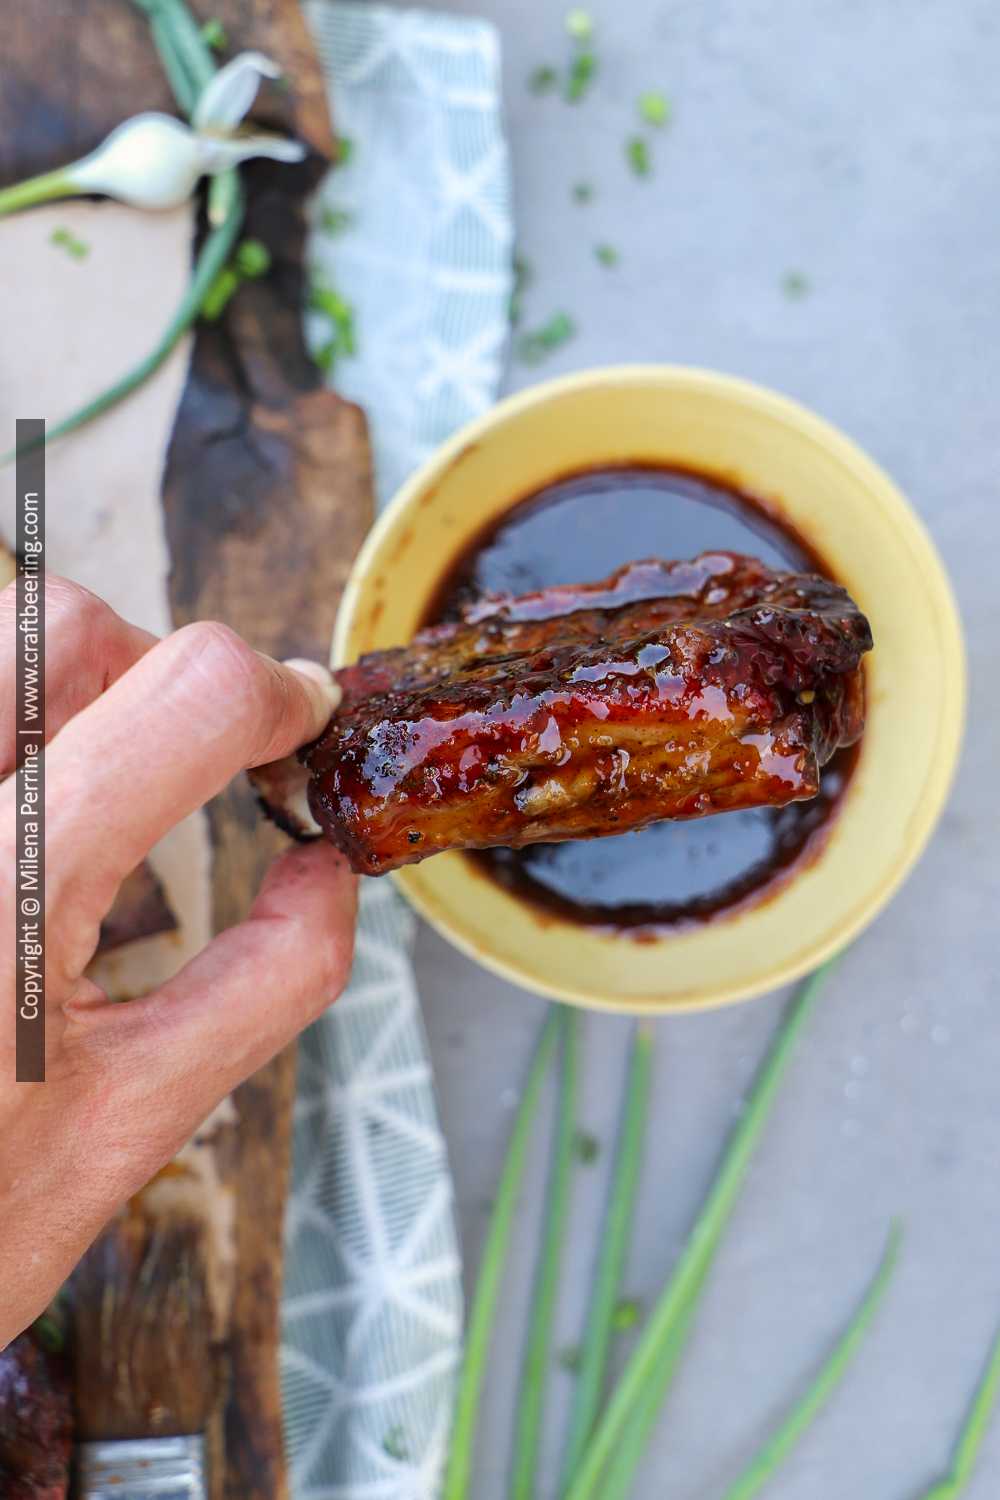 Beef back rib dipped in Hoising BBQ sauce